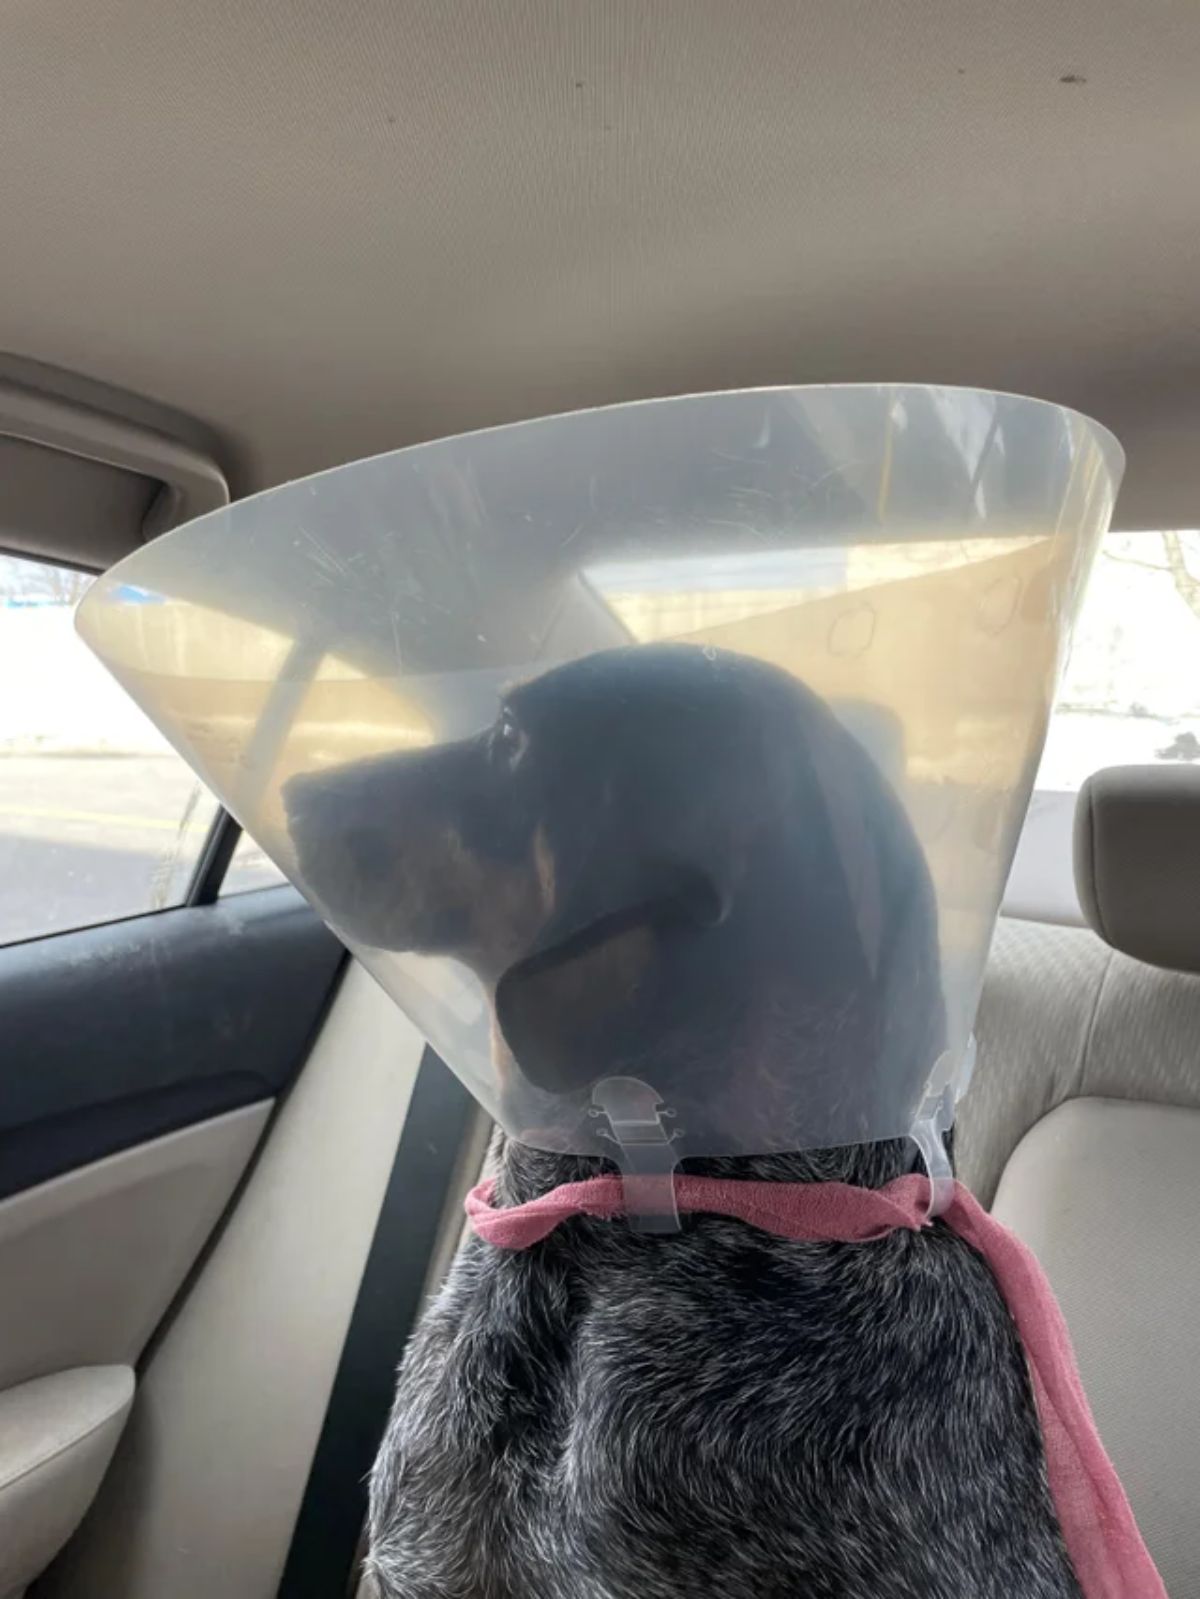 black dog in a transparent cone of shame sitting in the backseat of a vehicle